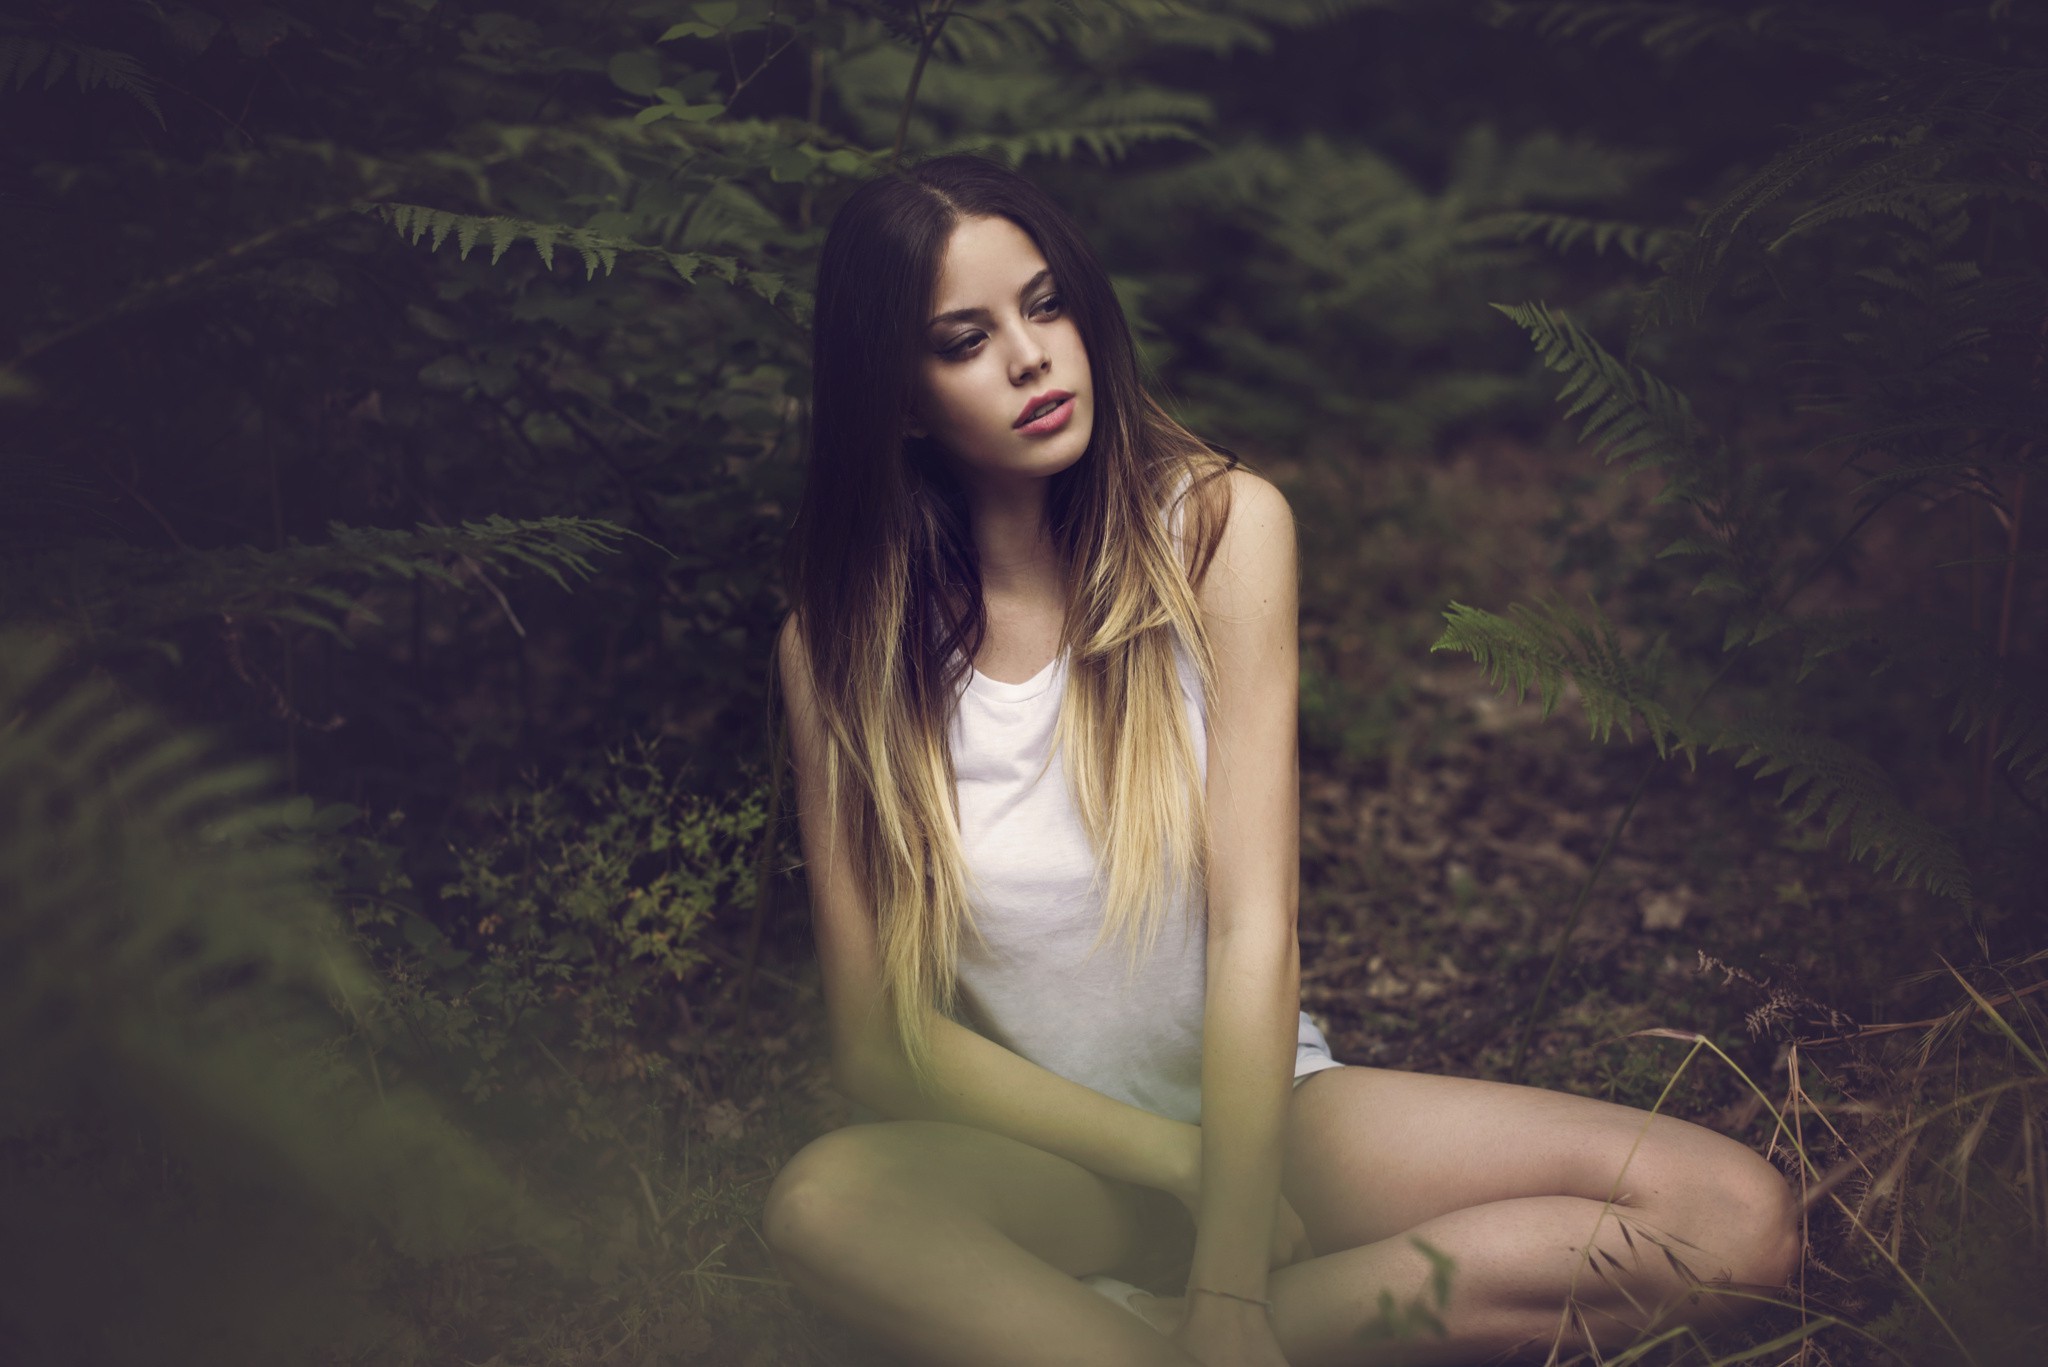 women, Dyed Hair, Face, Sitting, Women Outdoors, Juicy Lips, White Tops, Forest, Portrait, Hazy Wallpaper